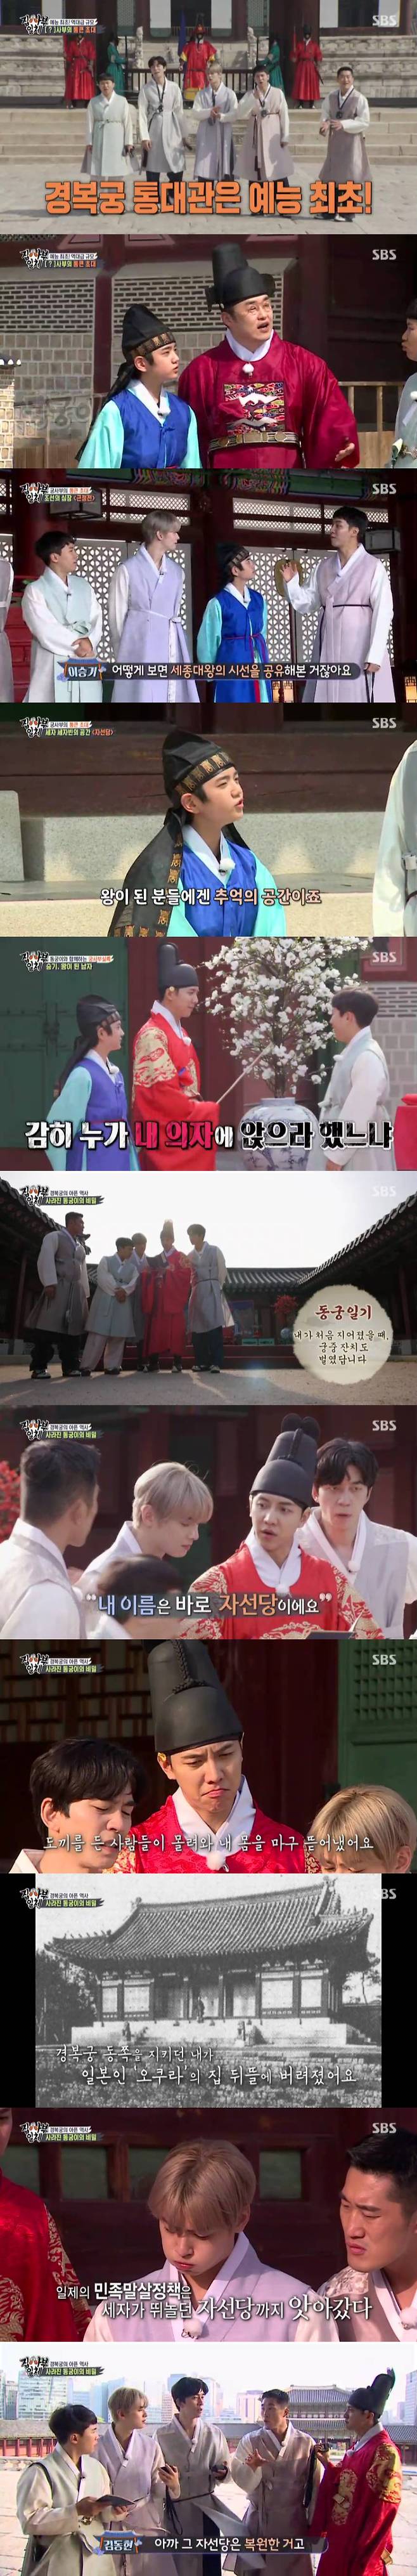 According to Nielsen Korea on March 3, the ratings of All The Butlers in the metropolitan area, which was broadcast on the 2nd, were 4.1% in the first part and 4% in the second part.The target audience rating of 2049, which is a topic and competitiveness indicator, rose to 2.1% and the highest audience rating per minute rose to 5.5%.The Master was Gyeongbokgung on the day.In the appearance of All The Butlers first non-personal master, the members seemed to be excited, saying, It seems to be the first and best master.In addition, on this day, Choi Tae-seong, a Korean history star lecturer, was in charge of history, and actor Kim Kang Hoon was with Goodbye My Princess.In particular, this film was the first to be awarded the Gyeongbokgung as a whole, and it was opened to the inside of the Geunjeongjeon and the gyeonghoeru second floor space that can not be easily entered.Members looked back at Gyeongbokgung following Choi Tae-seong and Goodbye My Princess.Choi Tae-seong said: If you look well there are stories of many people who lived here in the building.I think meeting the story is the meaning of Gyoungbokgung Master. Members looked inside the Geunjeongjeon and from gyeonghoeru to the Charity Party and the Guncheong Palace.Choi Tae-seong explained that the heartbreaking Empress Myeongseong was a space where the incident occurred, and the members said, Suddenly my heart hurts.Goodbye My Princess also said, I think it was too scary, I learned it from textbooks, but it is even worse when I come.Lee Seung-gi said, I thought it was a splendid place with a king, but it seems to be a place where people live in the end.While continuing to spend time at Gyeongbokgung, Goodbye My Princess, who was with the members, suddenly disappeared and embarrassed everyone.At this time, an unrelated person appears with a diary of Goodbye My Princess and says, Please find Goodbye My Princess with these clues.Goodbye My Princess must be in Gyongbokgung. The diary read, I am called Goodbye My Princess, the palace built in 1427, the palace in the east.The members found out that Goodbye My Princess was not a person but a charity party.The members followed the diary clues to the charity party, where a second diary was placed in front of the charity party, which contained a shocking past that the Japanese auctioned Gyoungbokgung.The members said, It was about 100 years ago, he said, I did not know that Gyeongbokgung was auctioned and torn it to Japan.Since then, the members have been looking for the original charity hall and heading to the backyard of the palace, but there was only a place left.Choi Tae-seong told the heartbreaking story of the philanthropy being reduced to a Japanese private art gallery as the gyeongbokgung pavilions were auctioned off.In 1923, the Kanto earthquake caused the charity to eventually disappear into a fire.After that, Professor Kim Jung-dong, who tried to rebuild his bitter history without forgetting, told the back story that he was able to return the neglected stone to Gyongbokgung.In addition, Choi Tae-seong told everyone that the backyard of the Guncheong Palace, which moved the charitable hall, was a place where Empress Myeongseong was buried and burned.Shin Sung-rok said, If we did not know this, we would just see it even if we came to Gyongbokgung.Choi Tae-seong said, Before the stonework of the charity party came back, the history of the charity party was erased.I recovered this, and because I put it back, I restored the story of the charity party. It is our mission to restore the lost history by finding one by one, restoring the lost story, and to pass on to the future.This is the teaching of the Gyeongbokgung Master, he said.Following the heartbreaking history hidden on this day, the scene of the teachings of the Gyeongbokgung Master reminded me of the meaning and took the best one minute with 5.5% per minute.